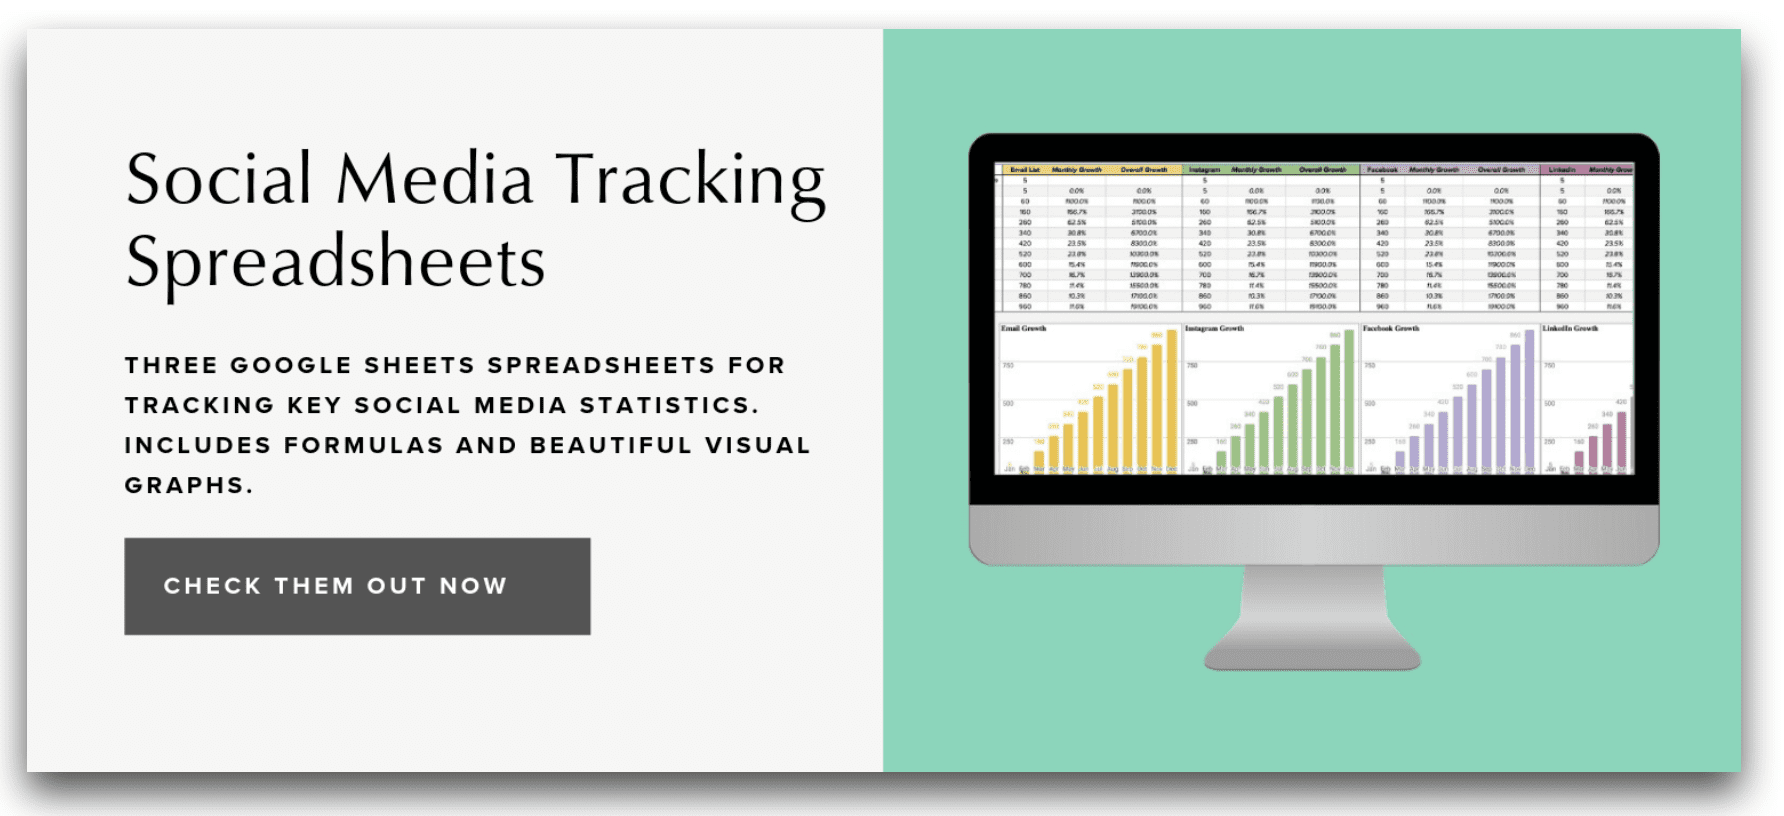 Tracking and measurement spreadsheets for social media analytics